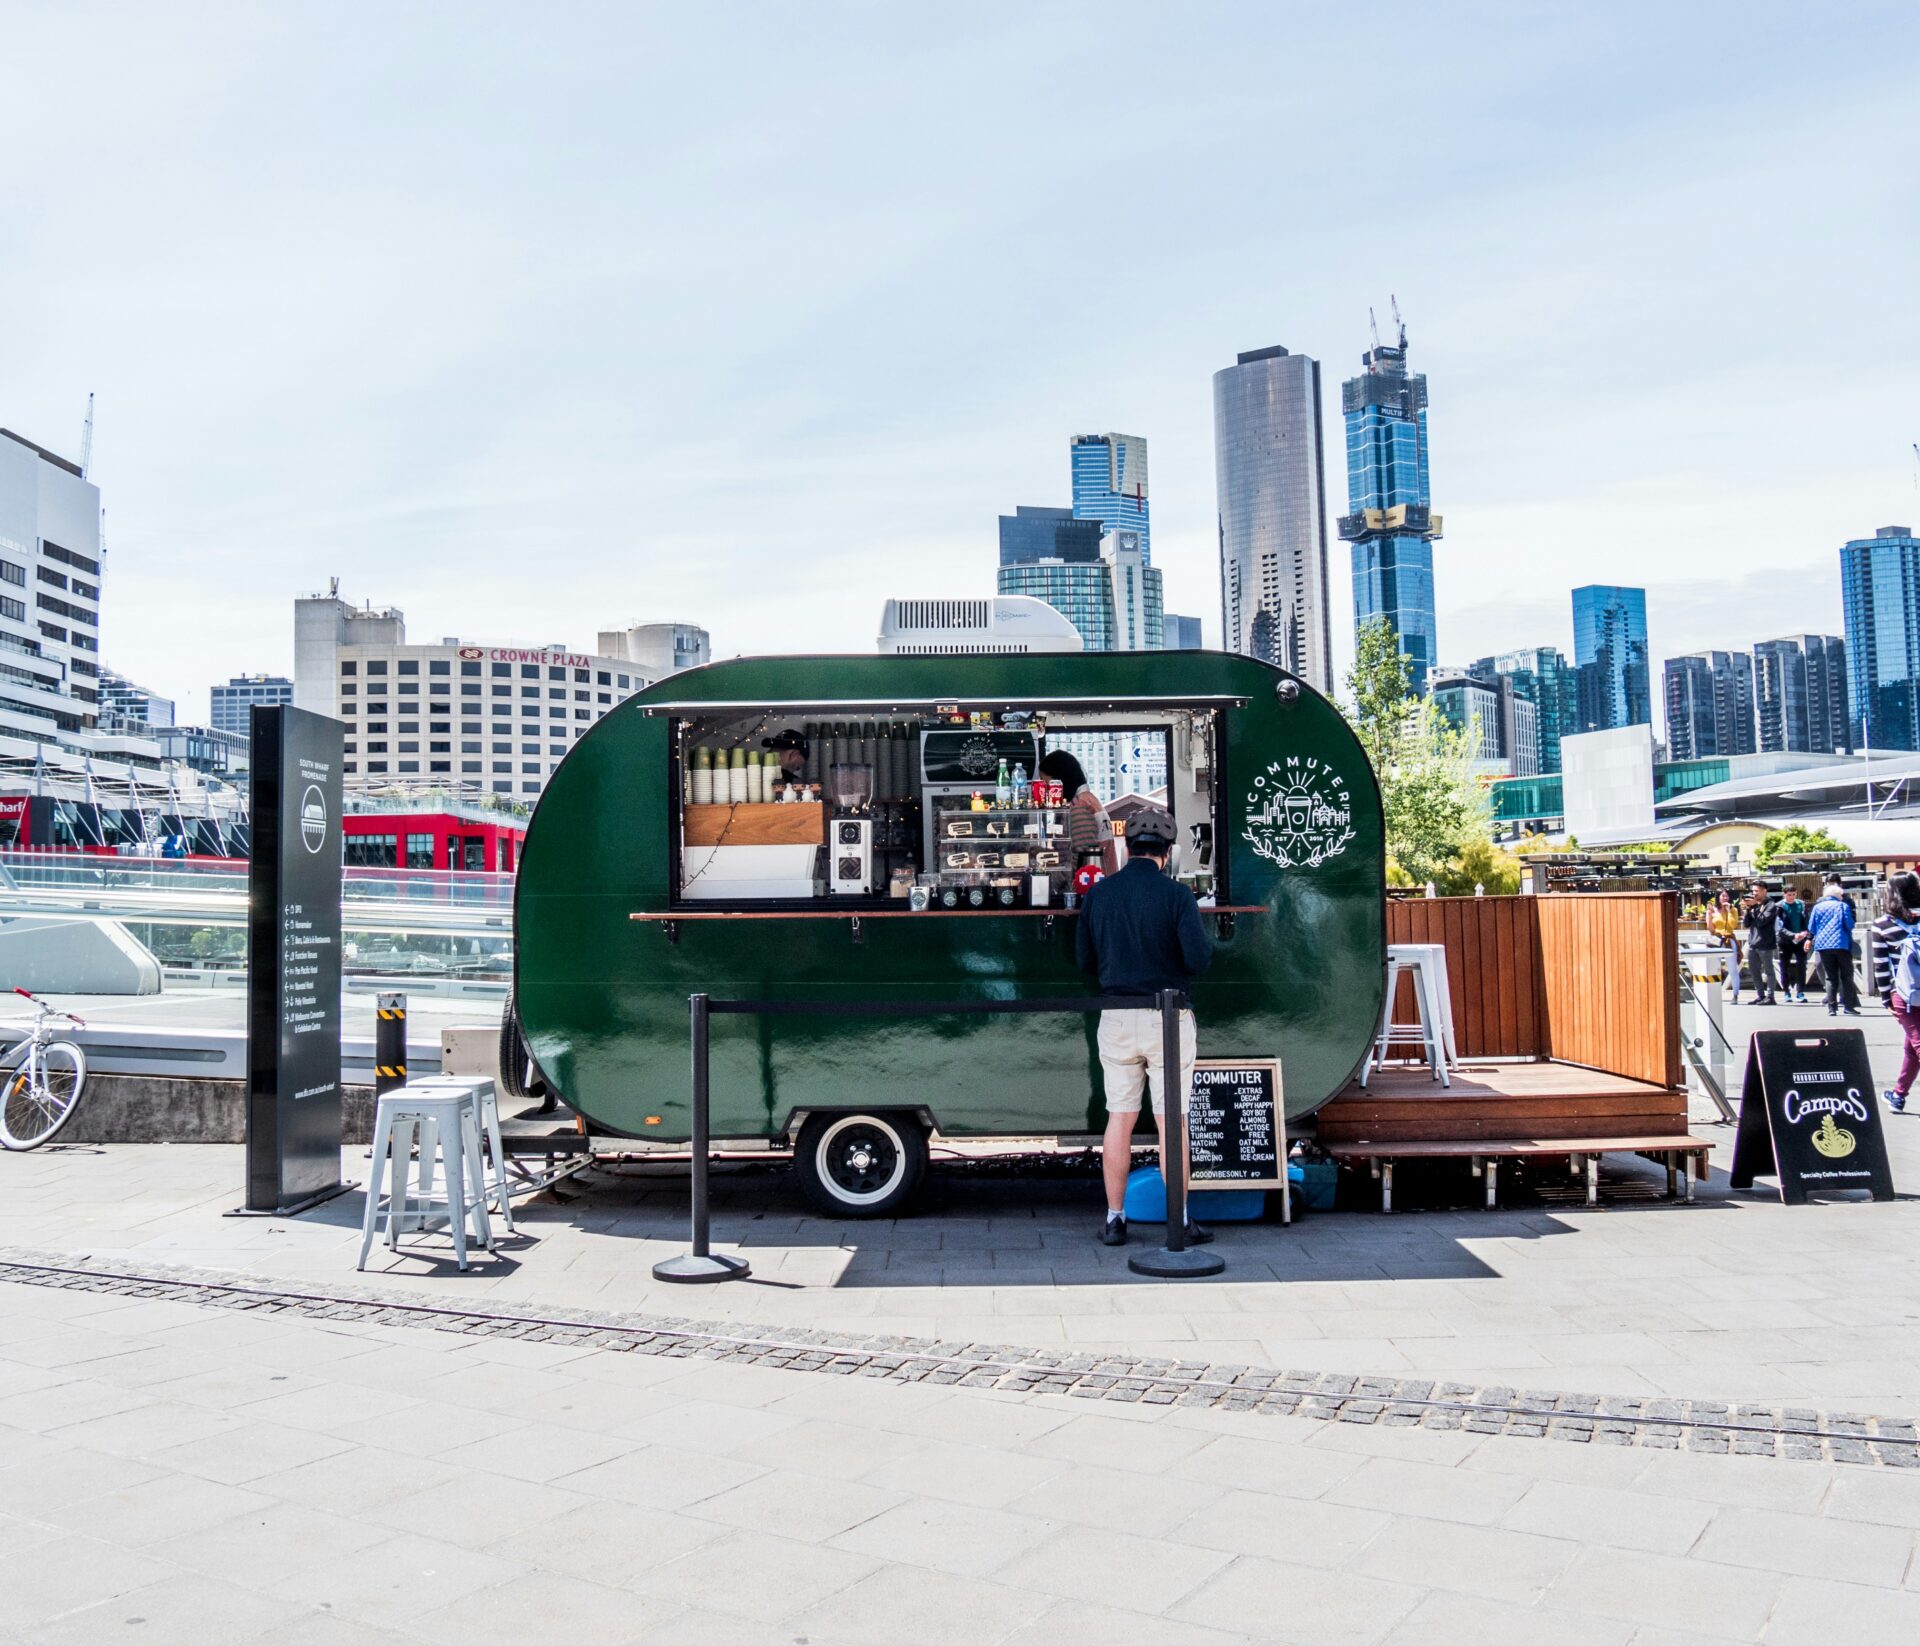 Commuter Coffee: Mobile coffee service at transport hubs in Melbourne